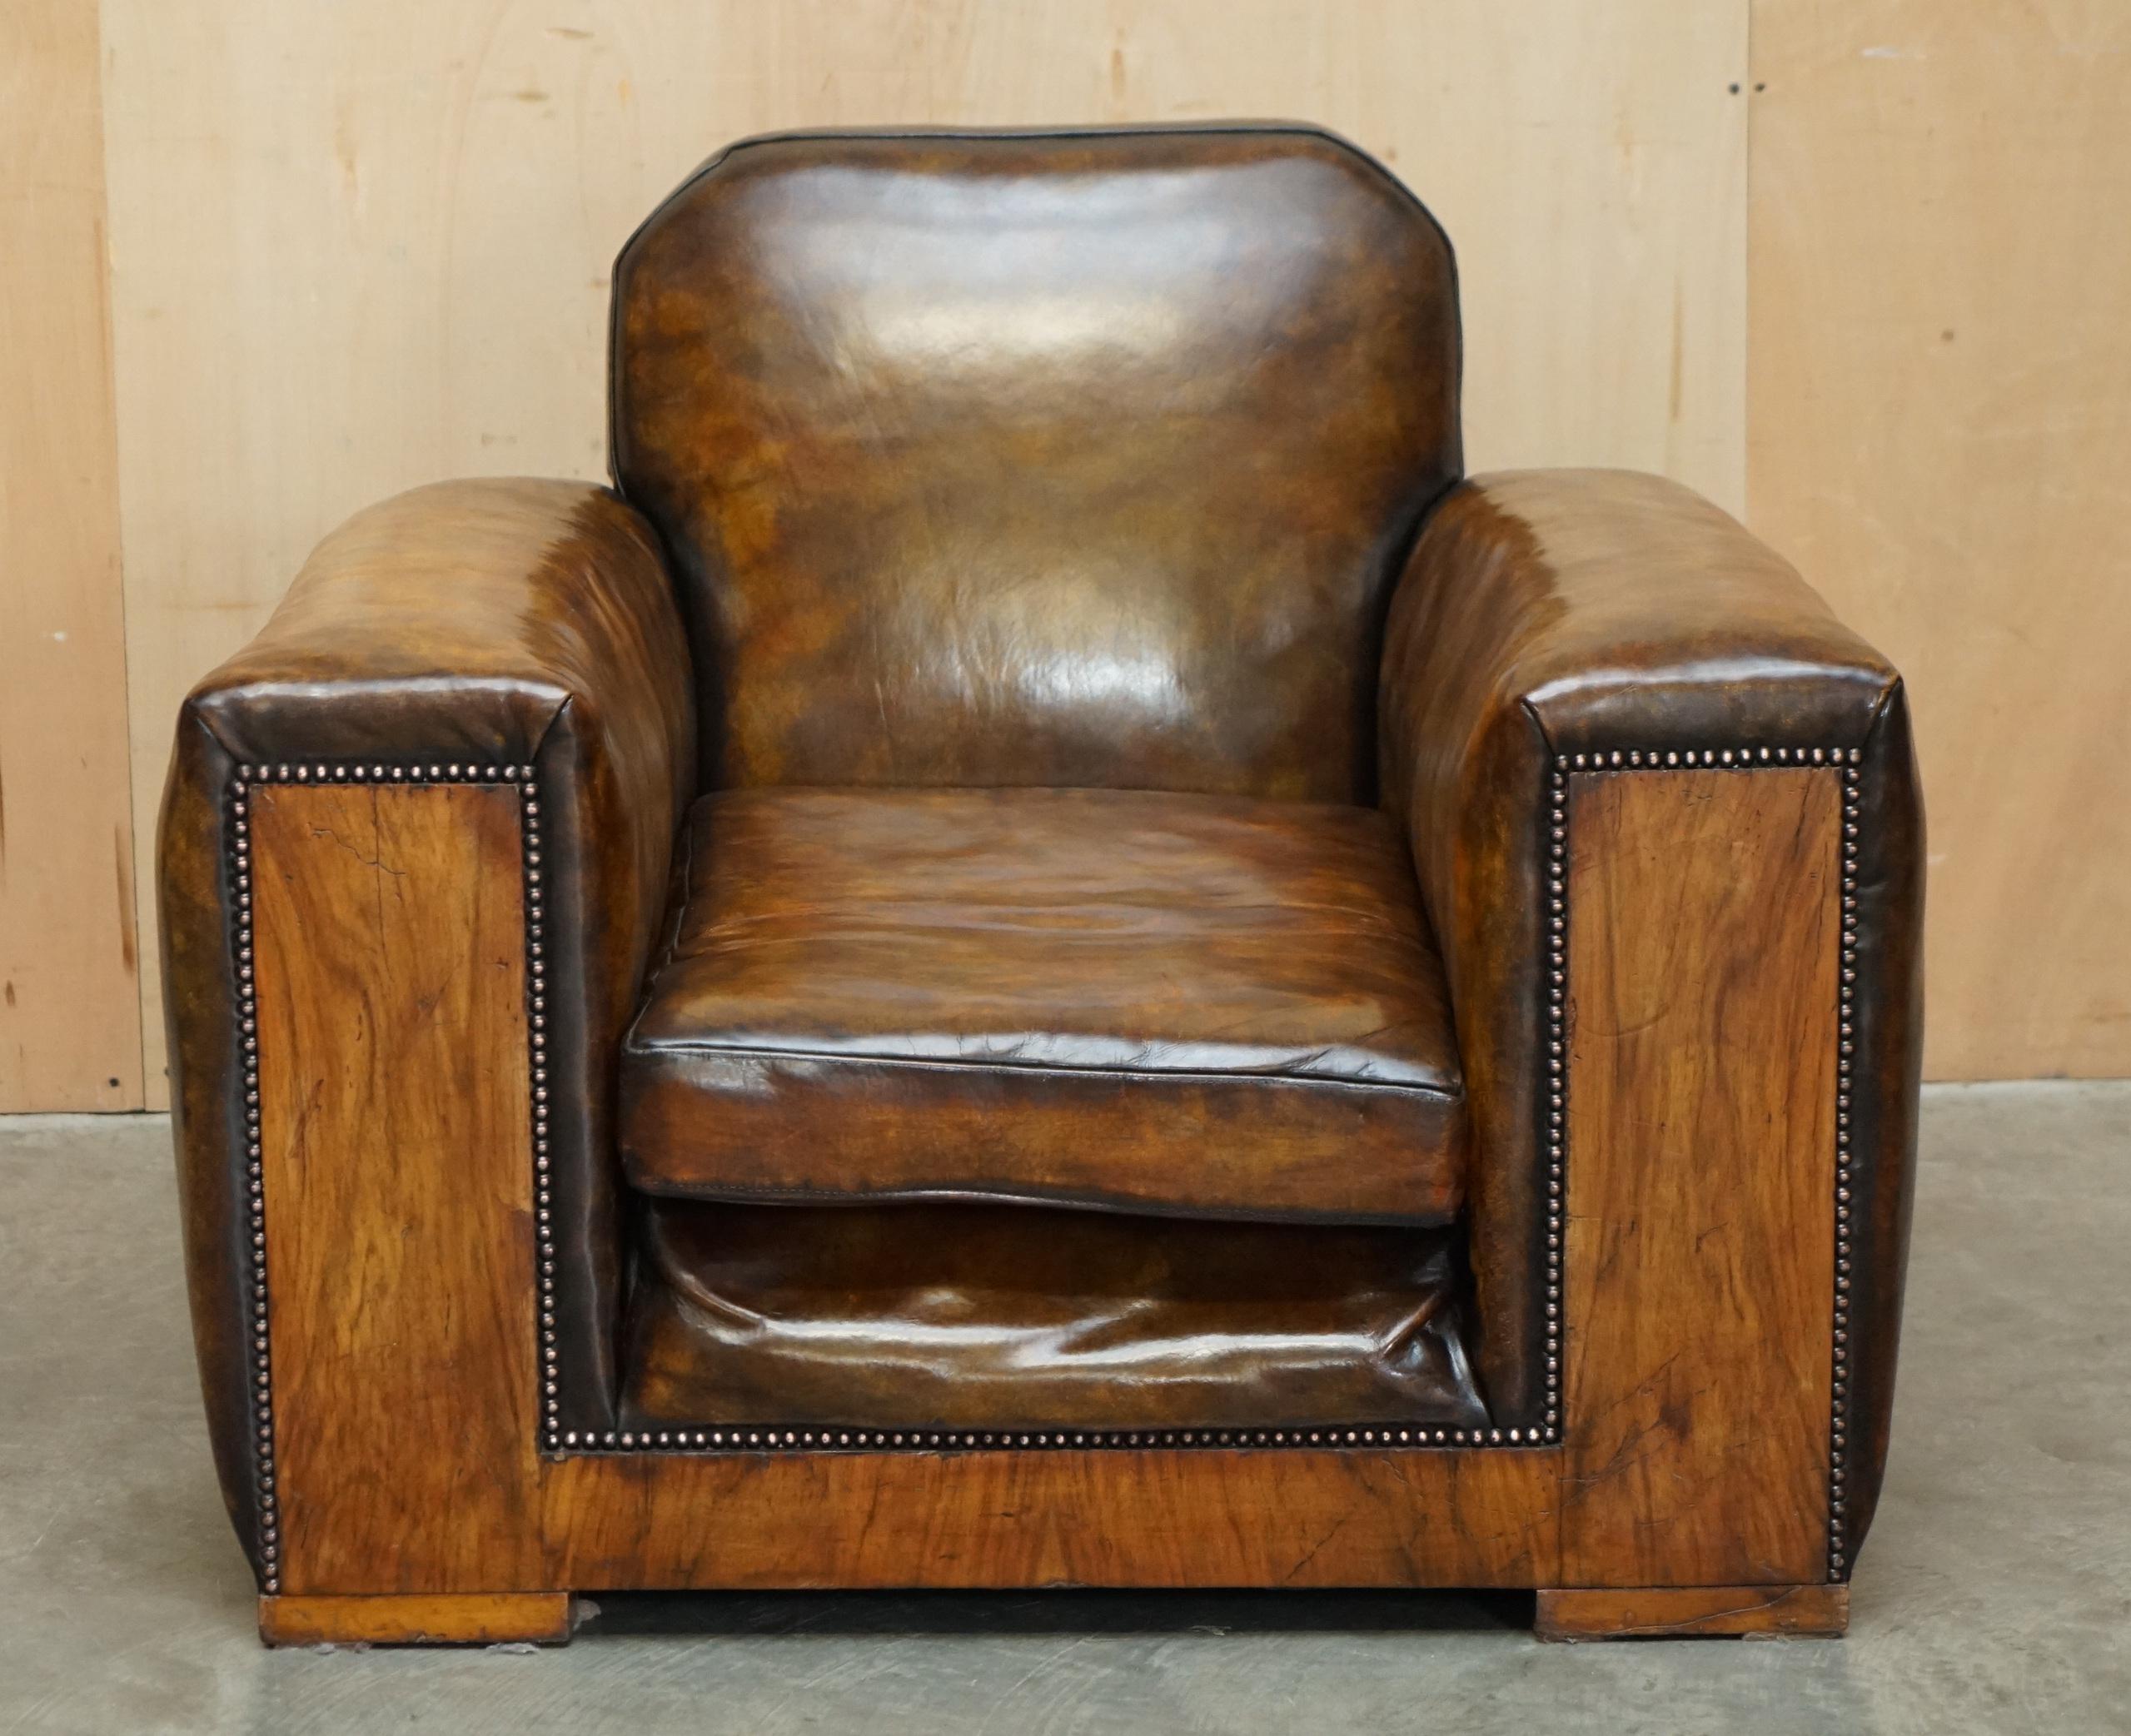 Royal House Antiques

Royal House Antiques is delighted to offer for sale this lovely vintage fully restored hand dyed brown leather with Walnut pillared armchairs, Club armchair ideally suited for an odeon or cinema room

Please note the delivery